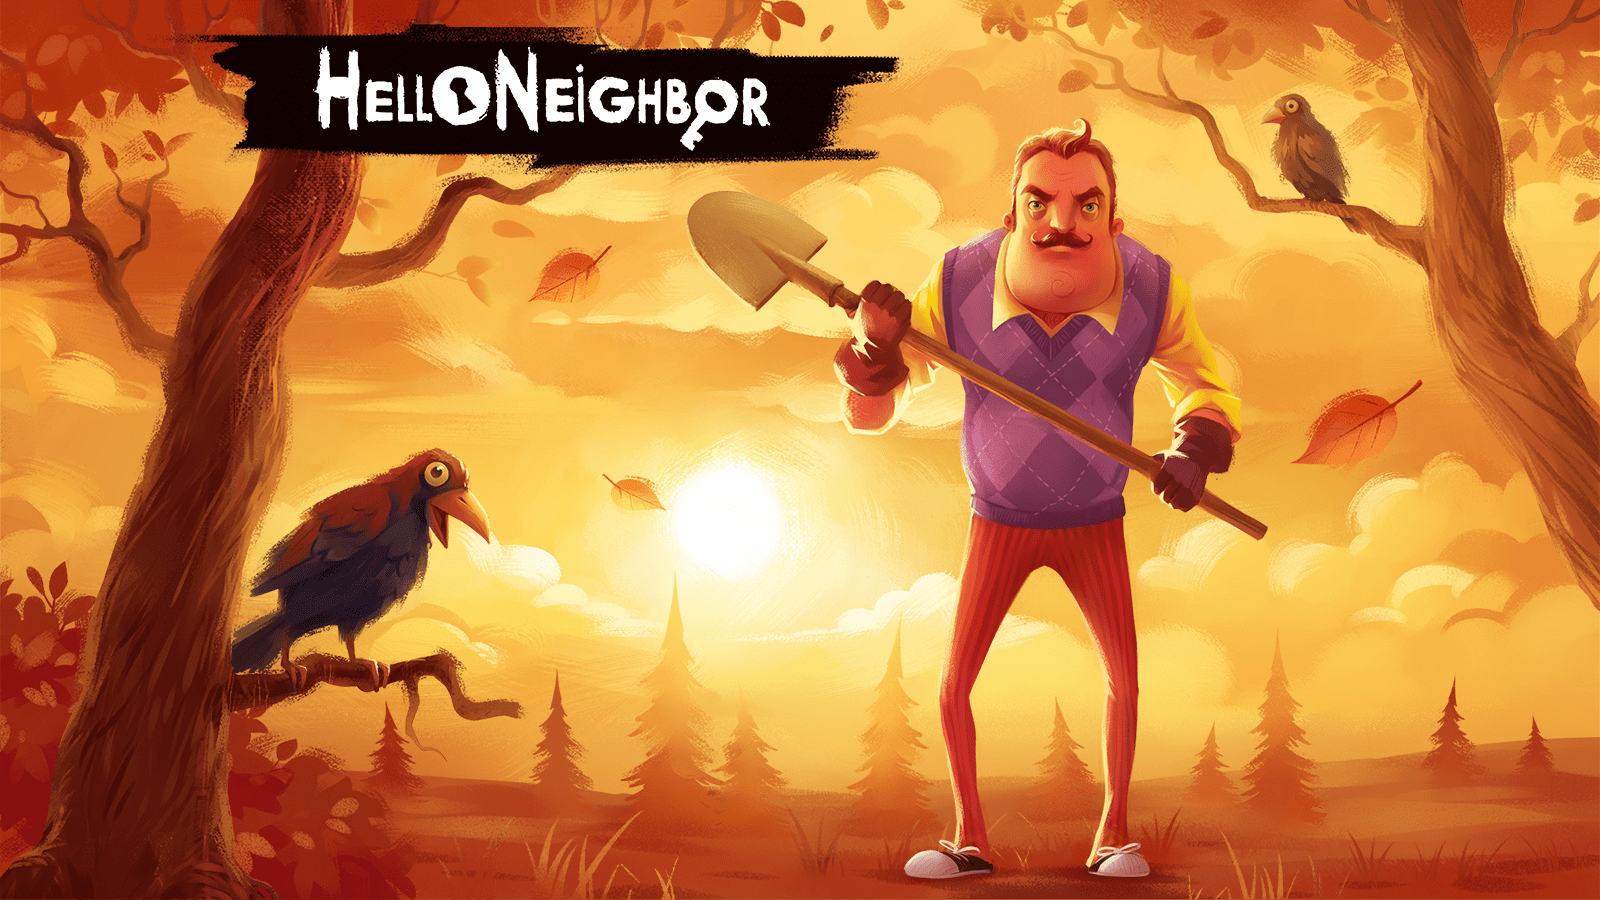 hello neighbor game play for free online